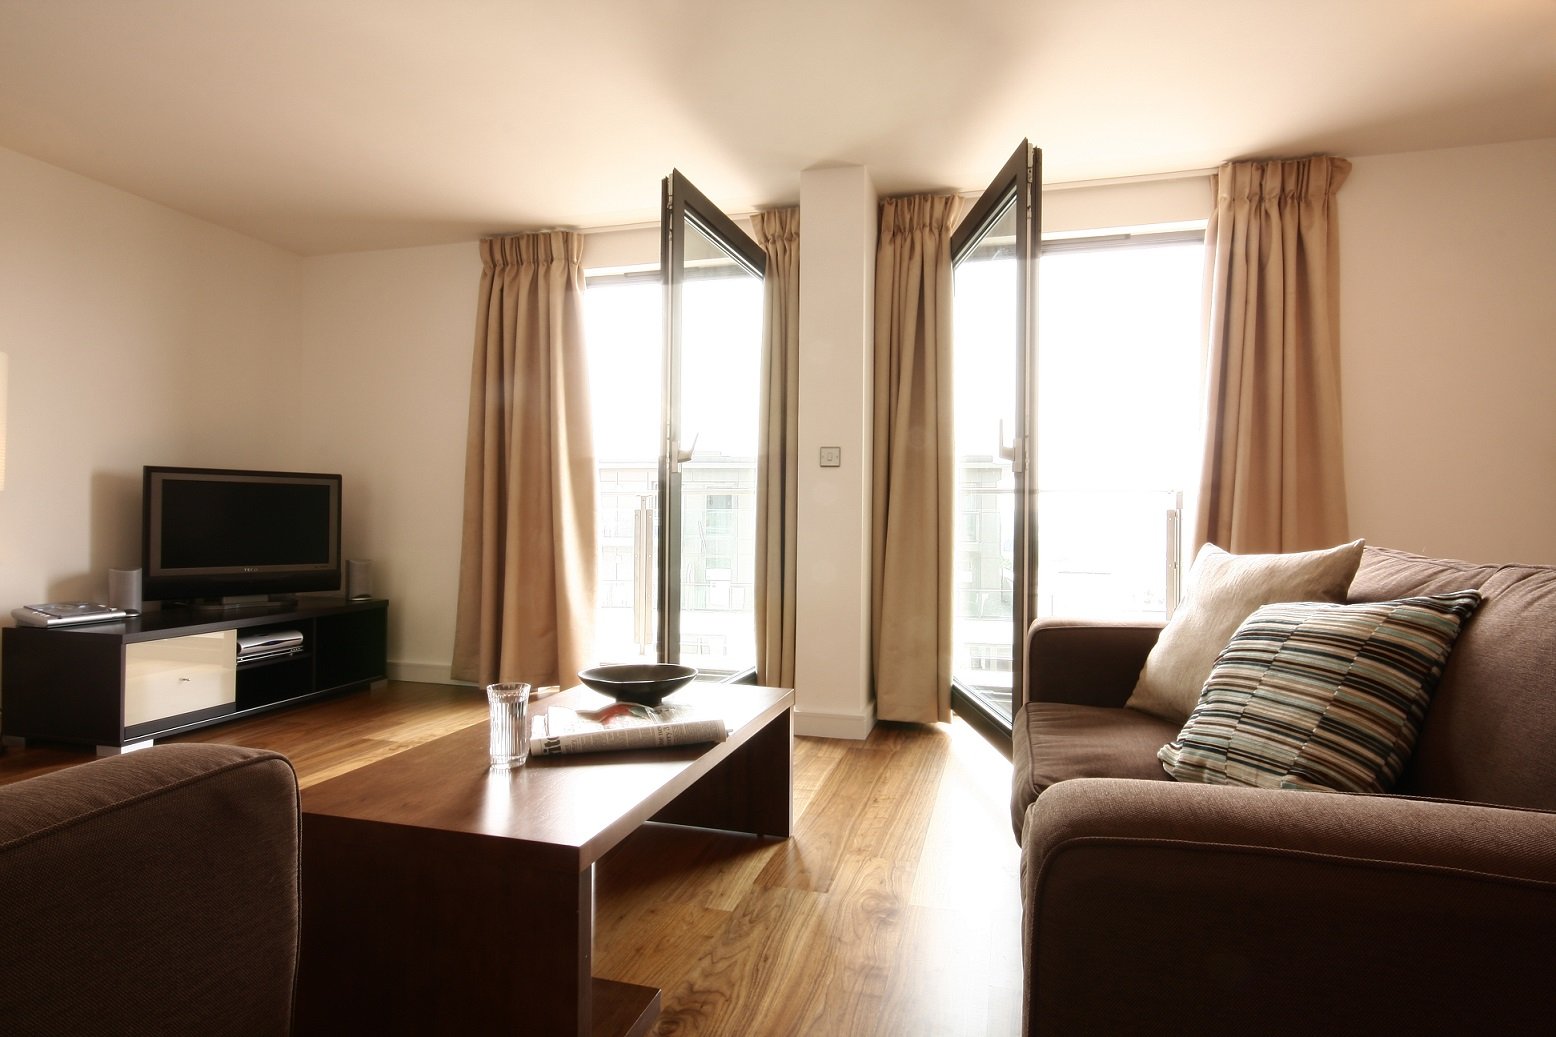 Mosaic Accommodation Serviced Apartments - Slough | Urban Stay